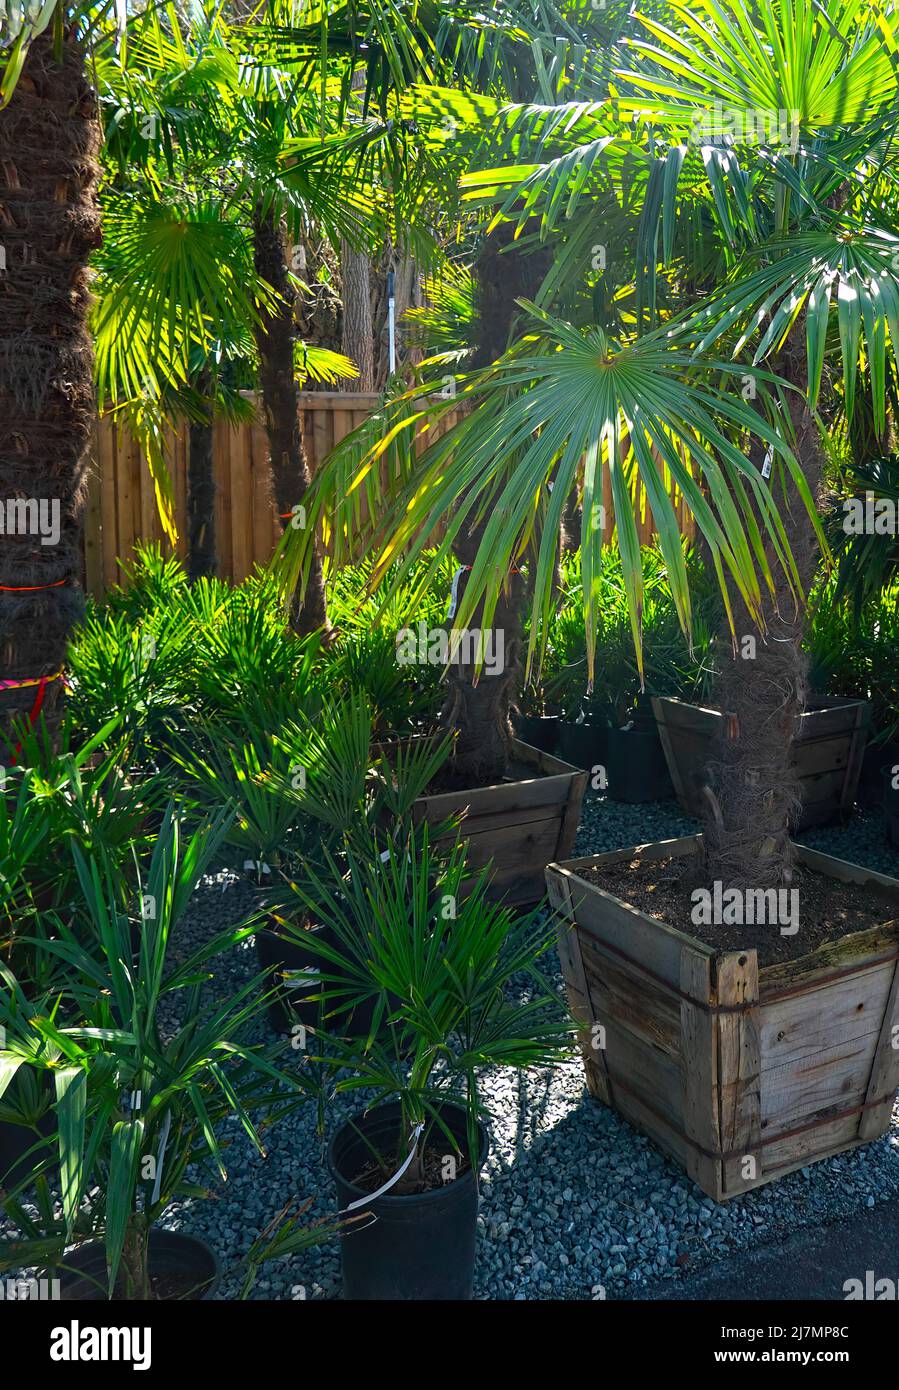 Palm trees (Arecaceae) in planters at a garden centre. Stock Photo